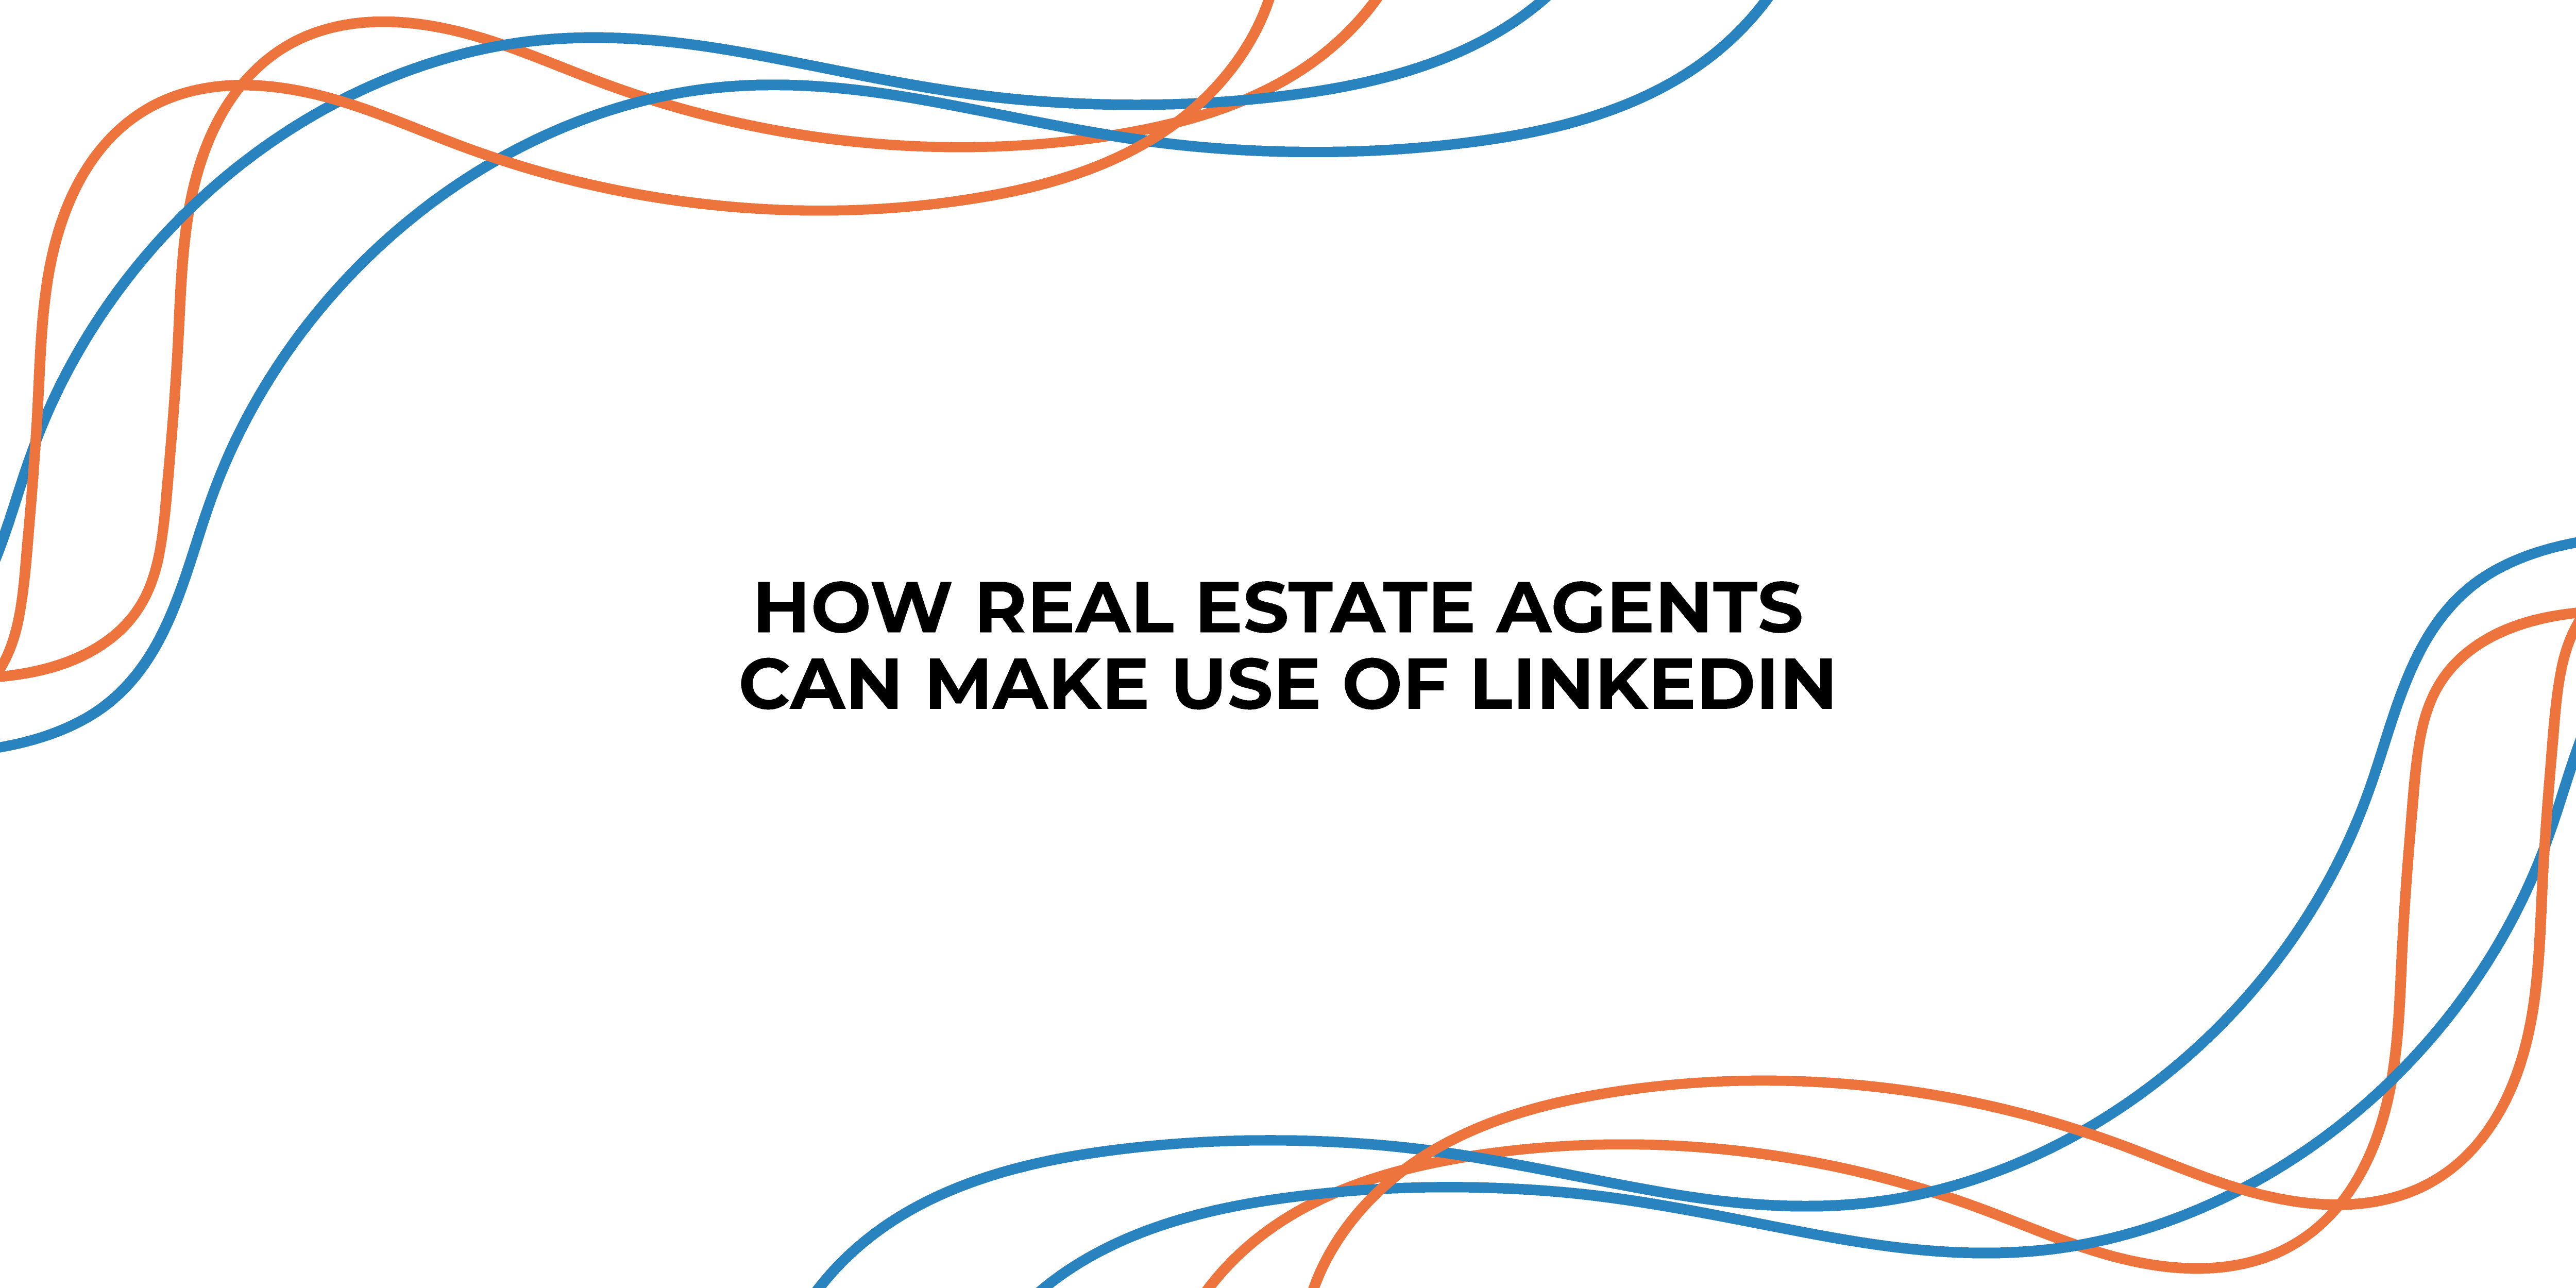 How real estate agents can make use of LinkedIn